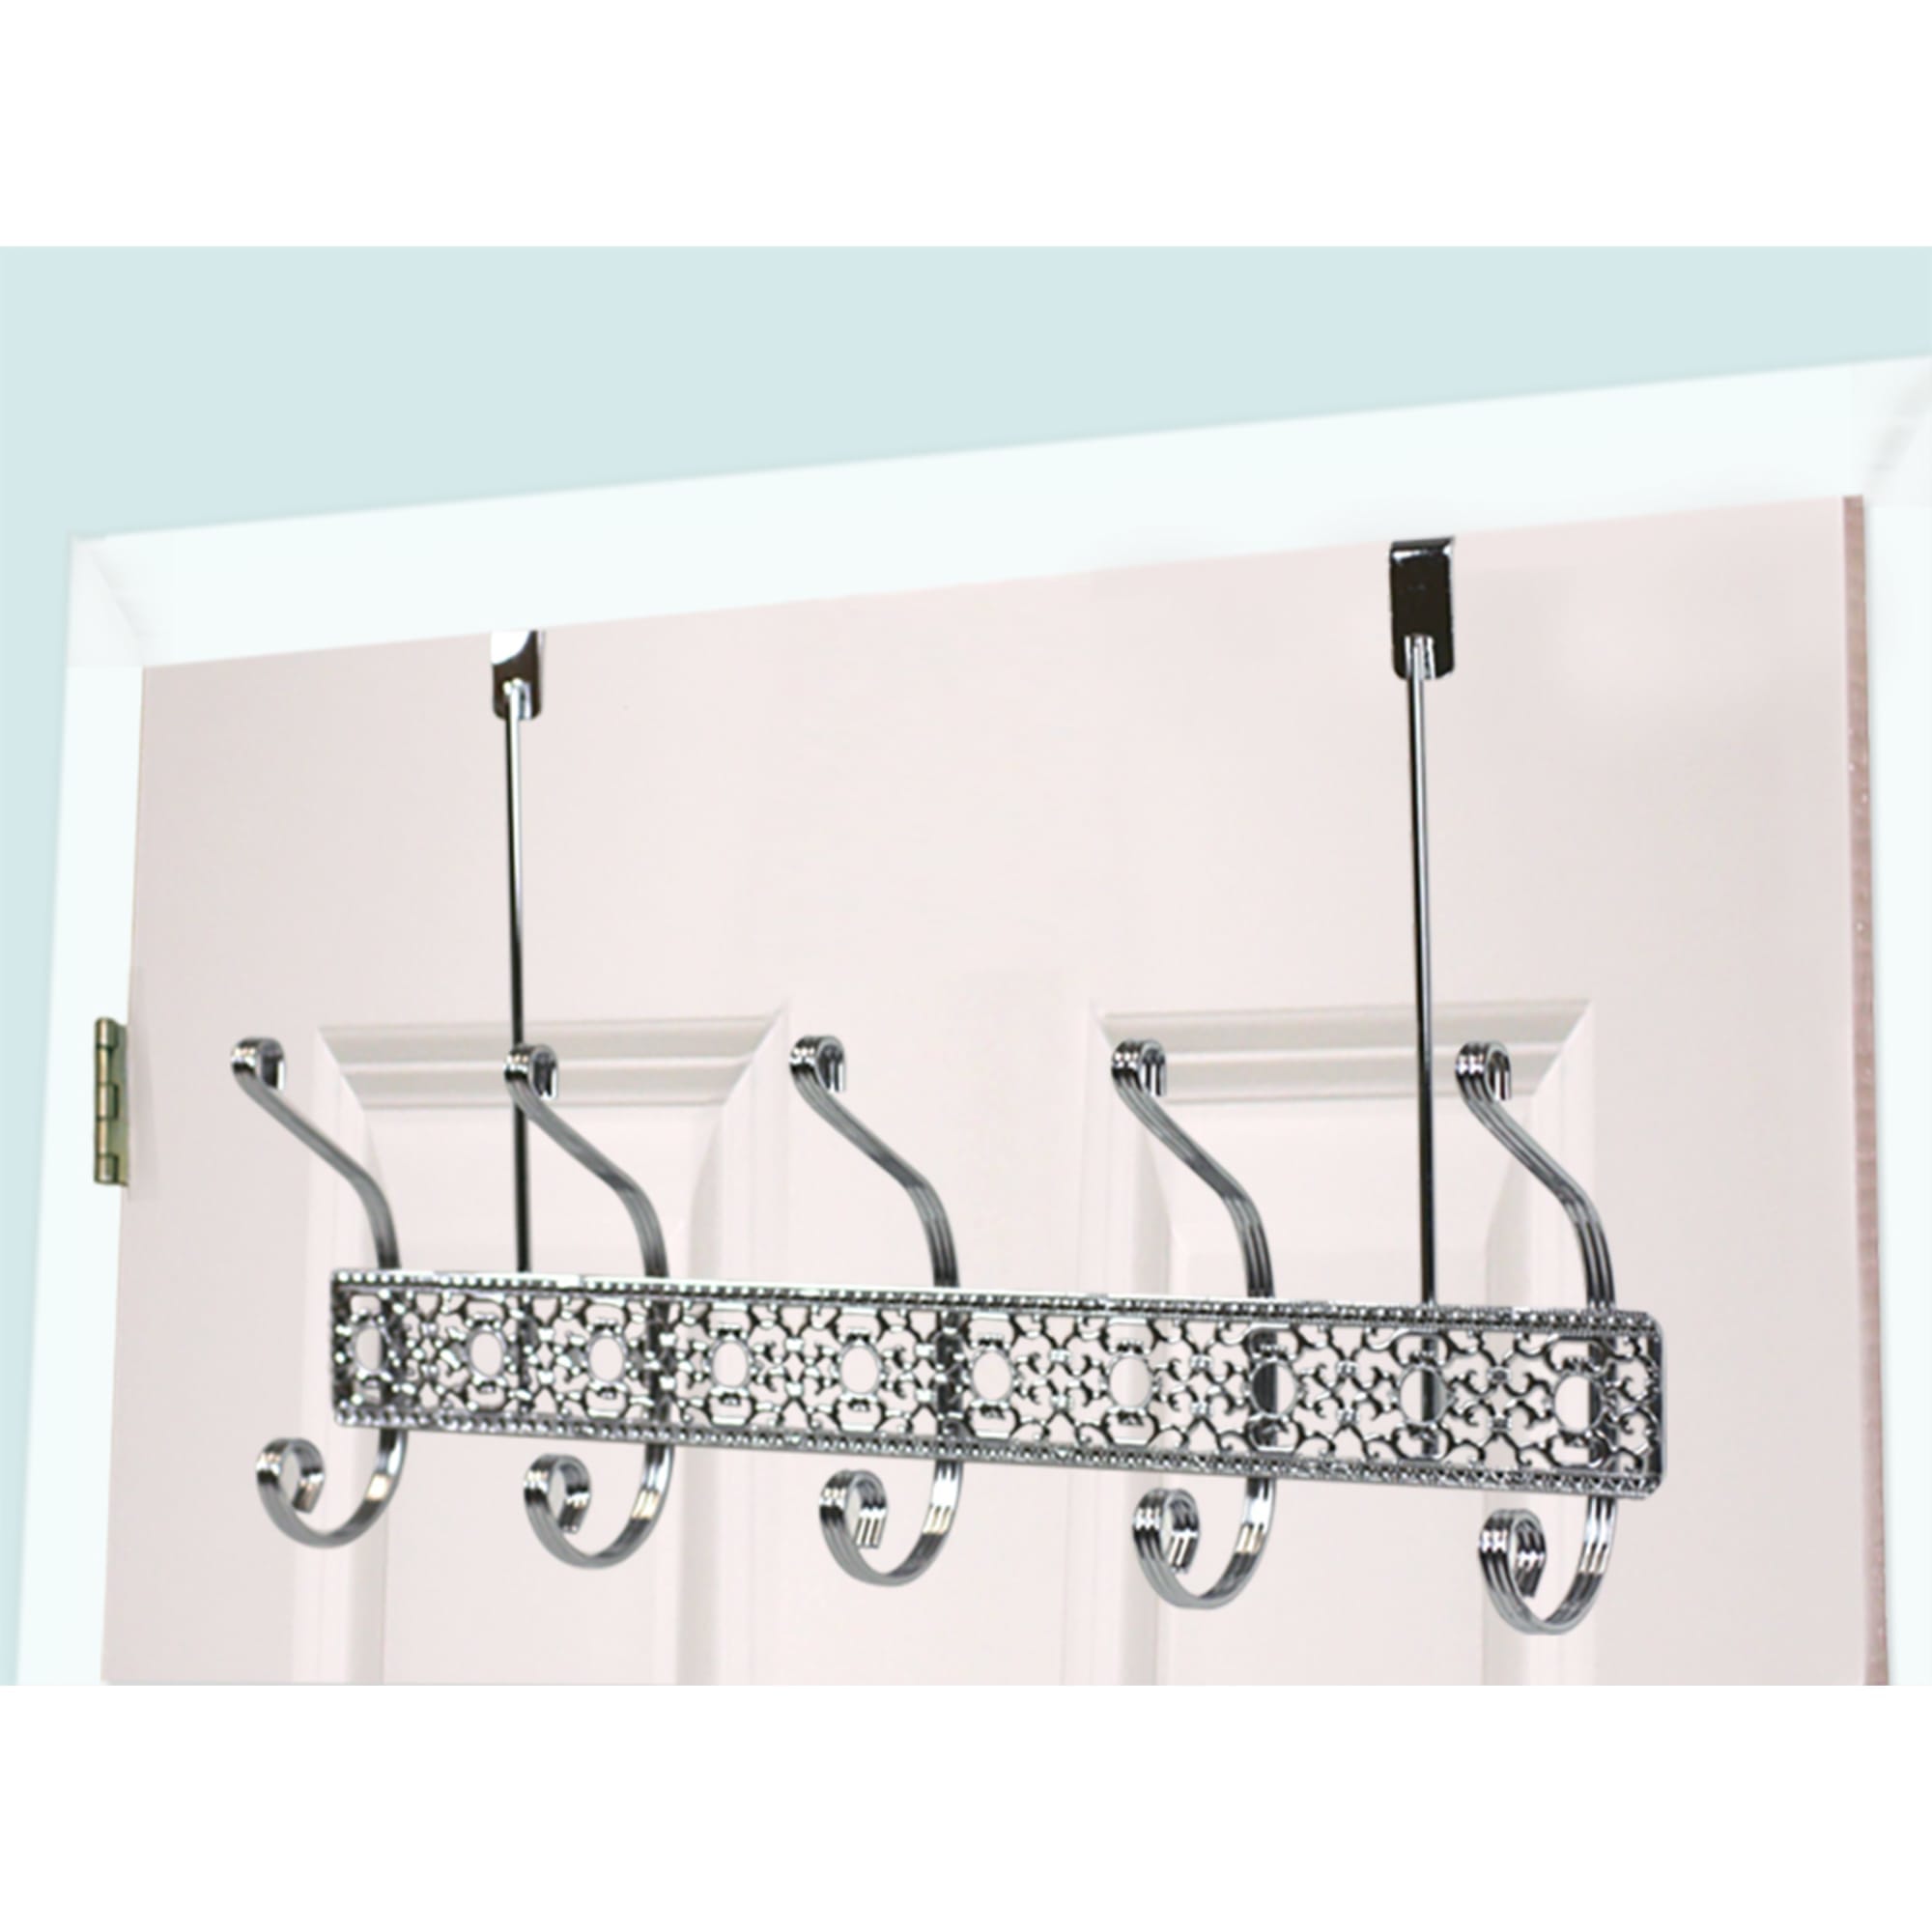 Home Basics 5 Dual Hook Chrome Plated Steel Over the Door Hanging Rack $8.00 EACH, CASE PACK OF 12